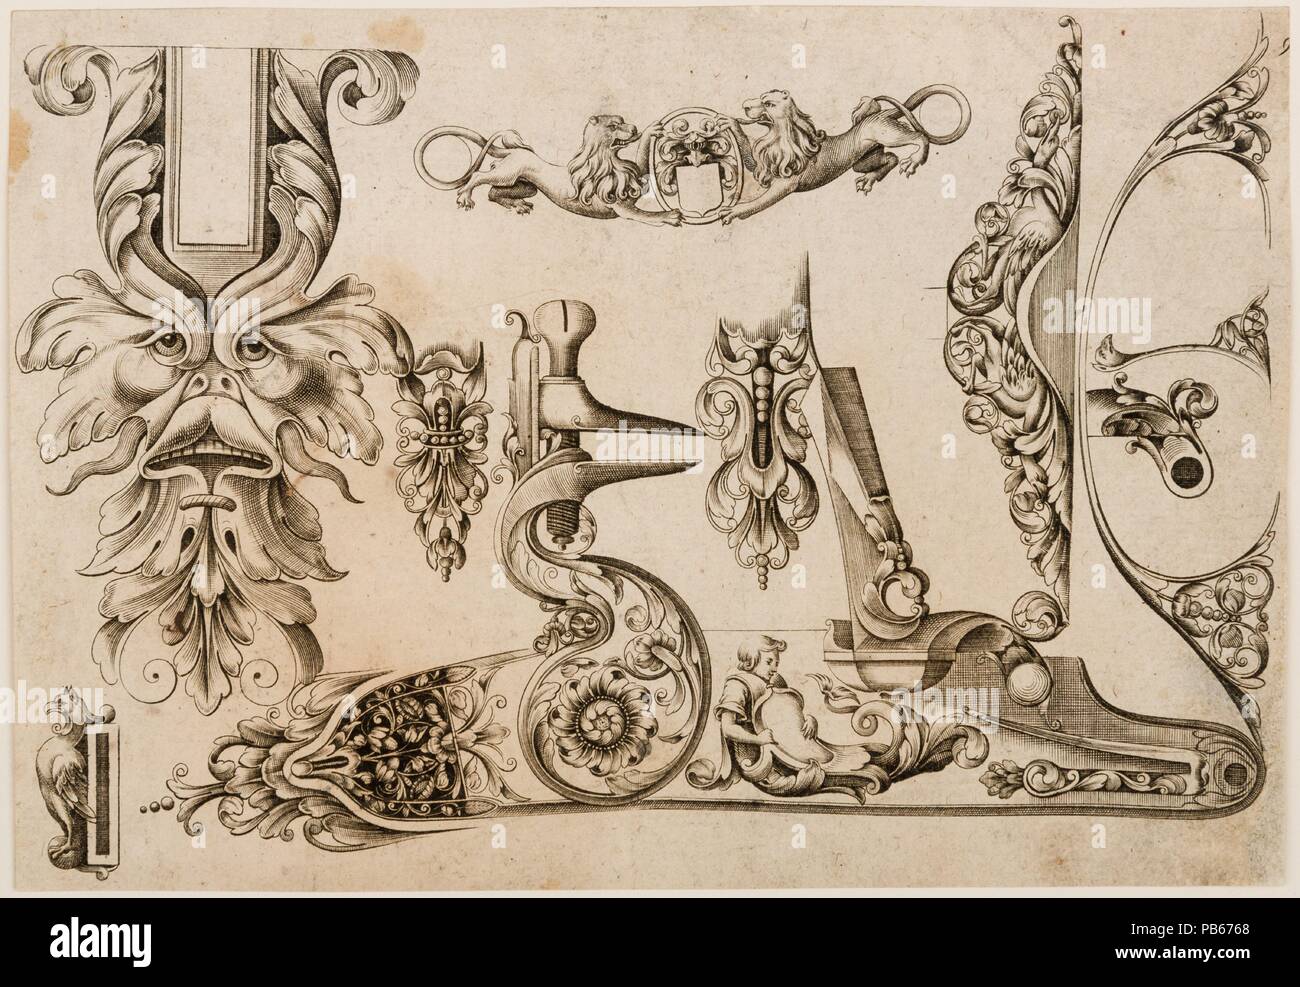 Plate Nine from Plusieurs Models des plus nouuelles manieres qui sont en usage en l'Art de Arquebuzerie. Culture: French, Paris. Dimensions: sheet: 7 1/8 x 5 in. (18.1 x 5 cm). Engraver: C. Jacquinet (French, Paris, active mid-17th century). Publisher: Thuraine (French, Paris, active mid-17th century); Le Hollandois (French, Paris, active mid-17th century). Date: ca. 1660.  Little is known about the royal gunmakers, Thuraine and Le Hollandois, who published the pattern book from which this sheet comes. It remains a rare and important document of Parisian gunmaking and the leading style of fire Stock Photo